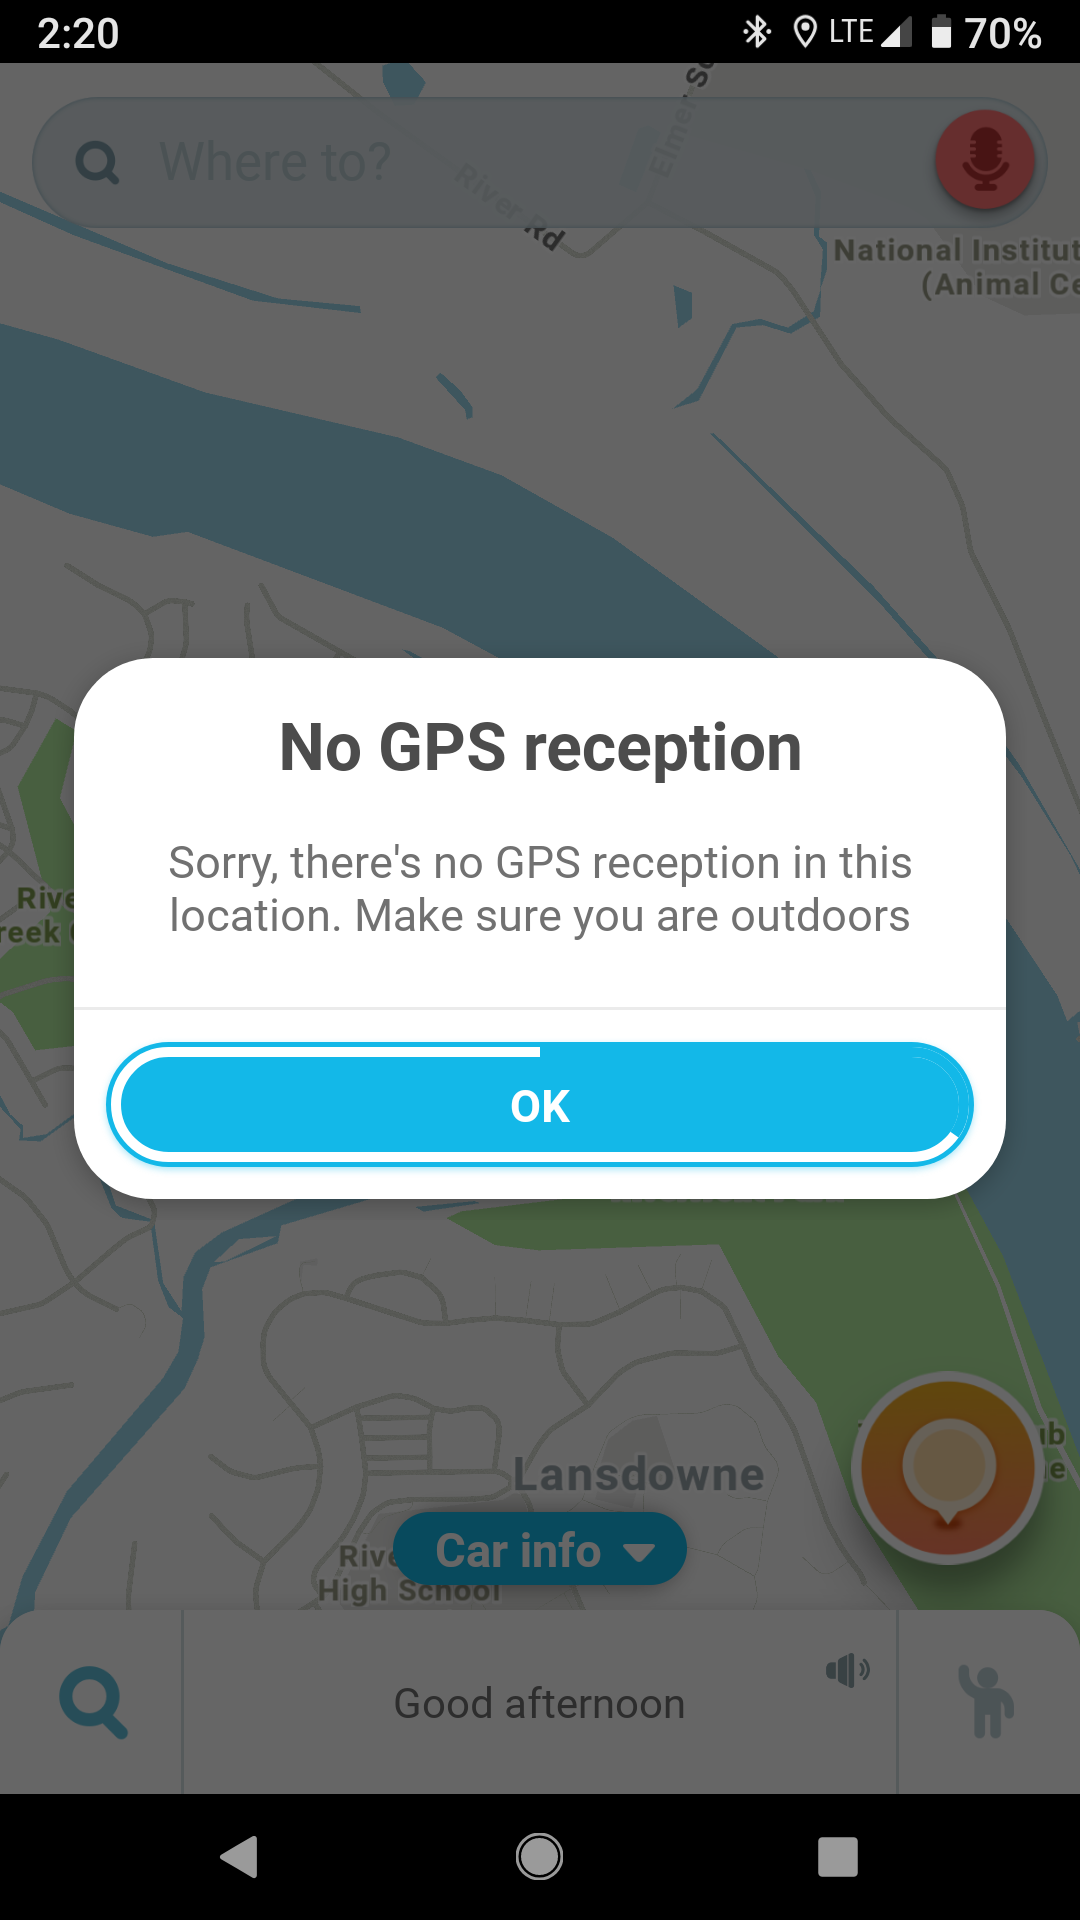 Why is there no GPS signal?